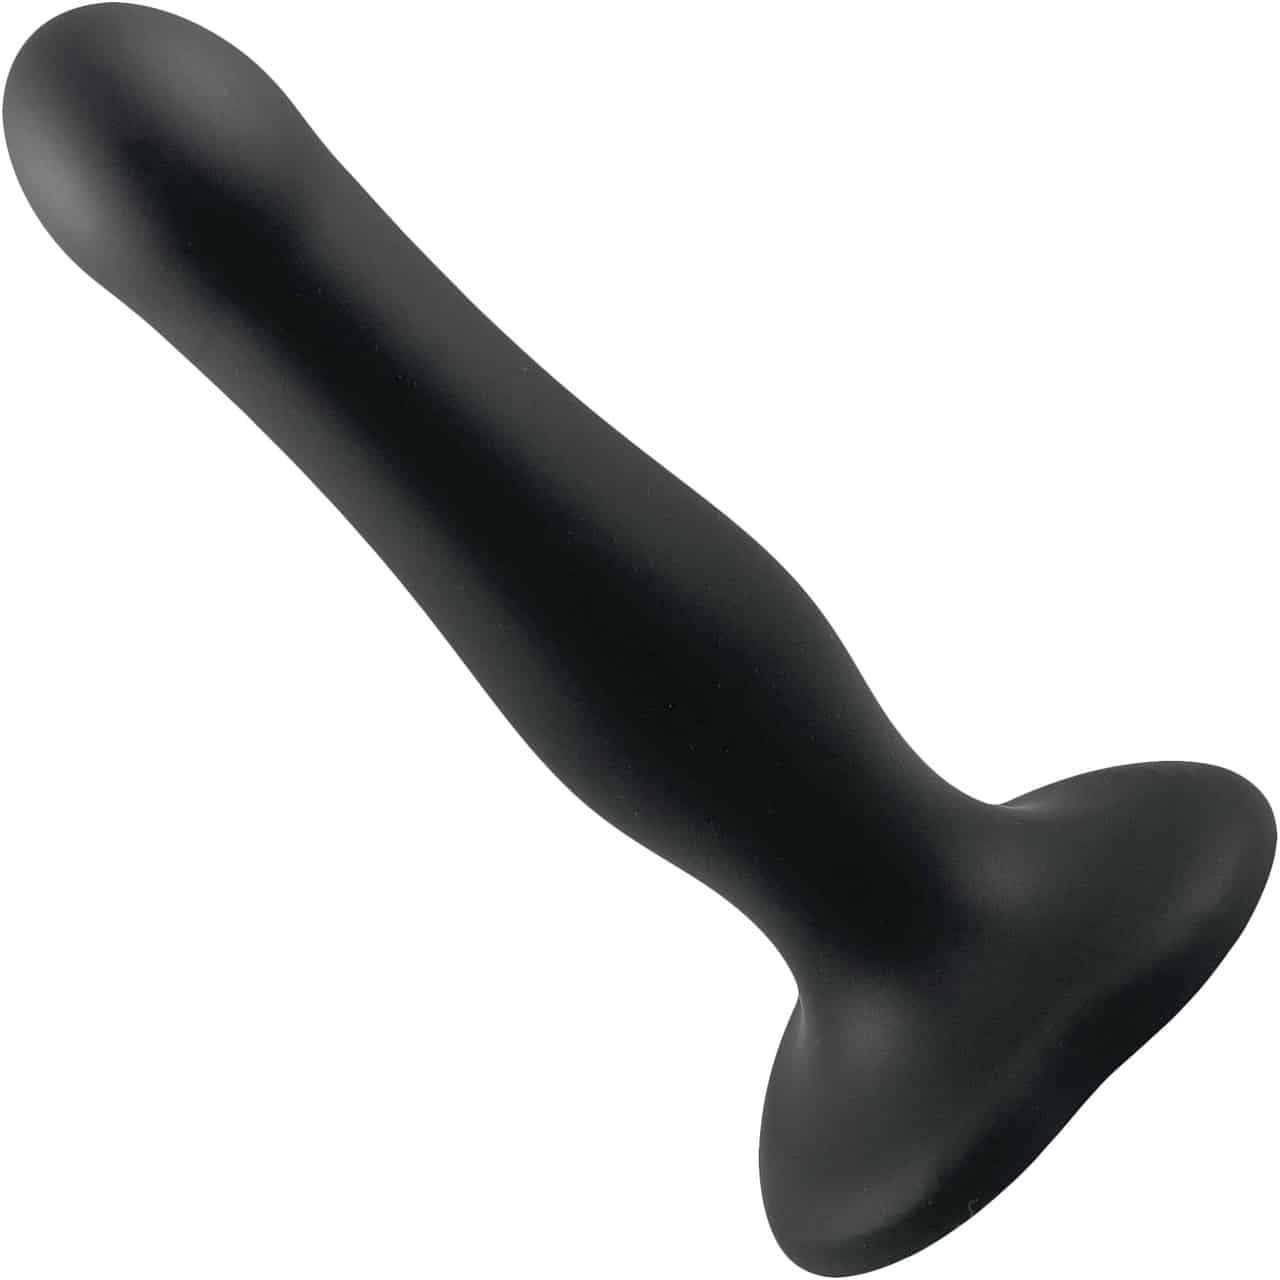 Inflatable Silicone Suction Cup Dildo Plug. Slide 3